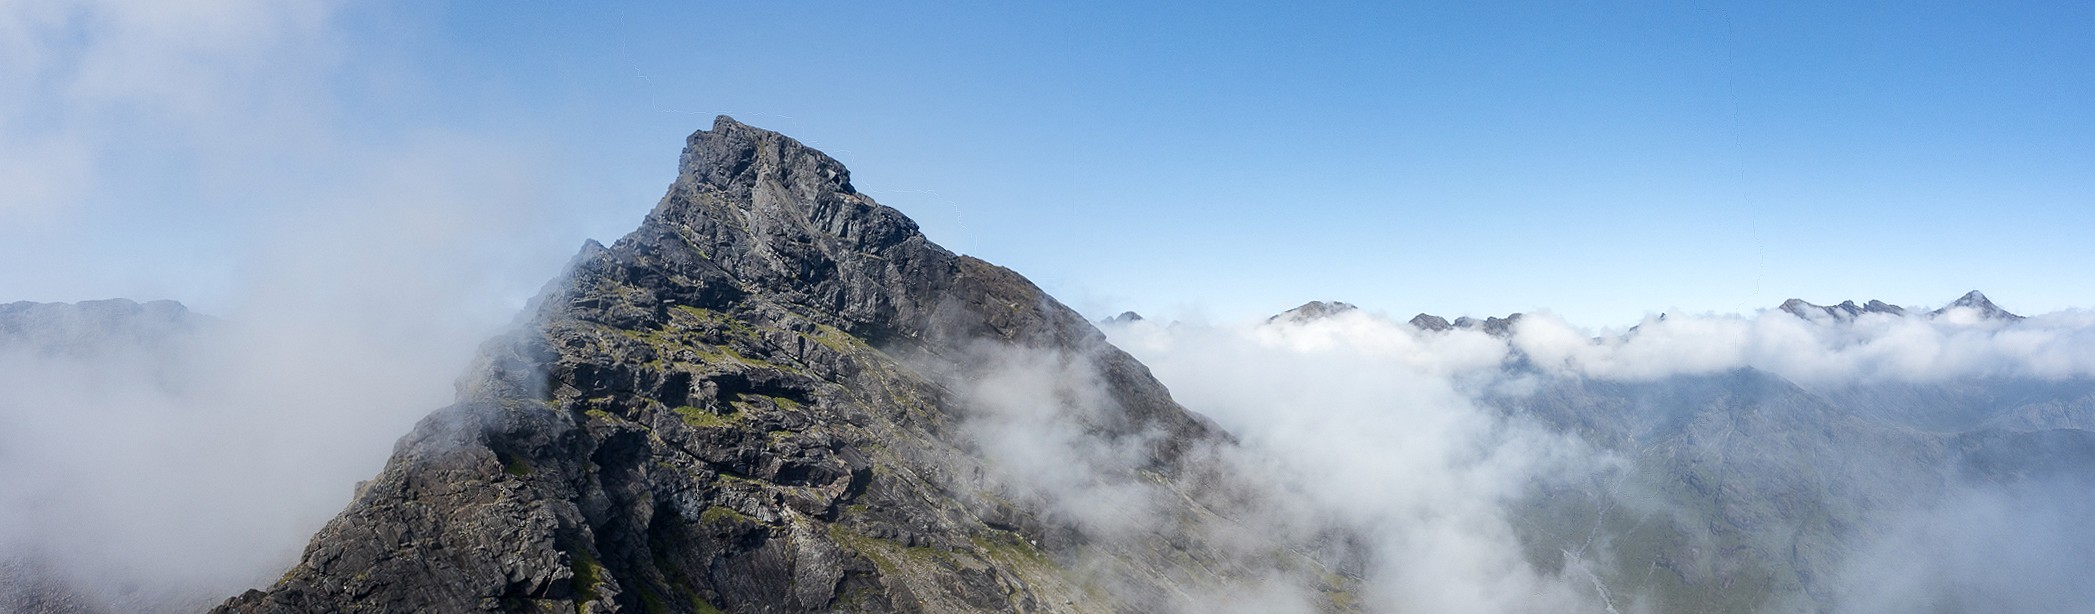 Sgurr Dubh Mor emerges from the cloud, as seen from Sgurr Dubh Beag - it's where we're heading next  © Dan Bailey